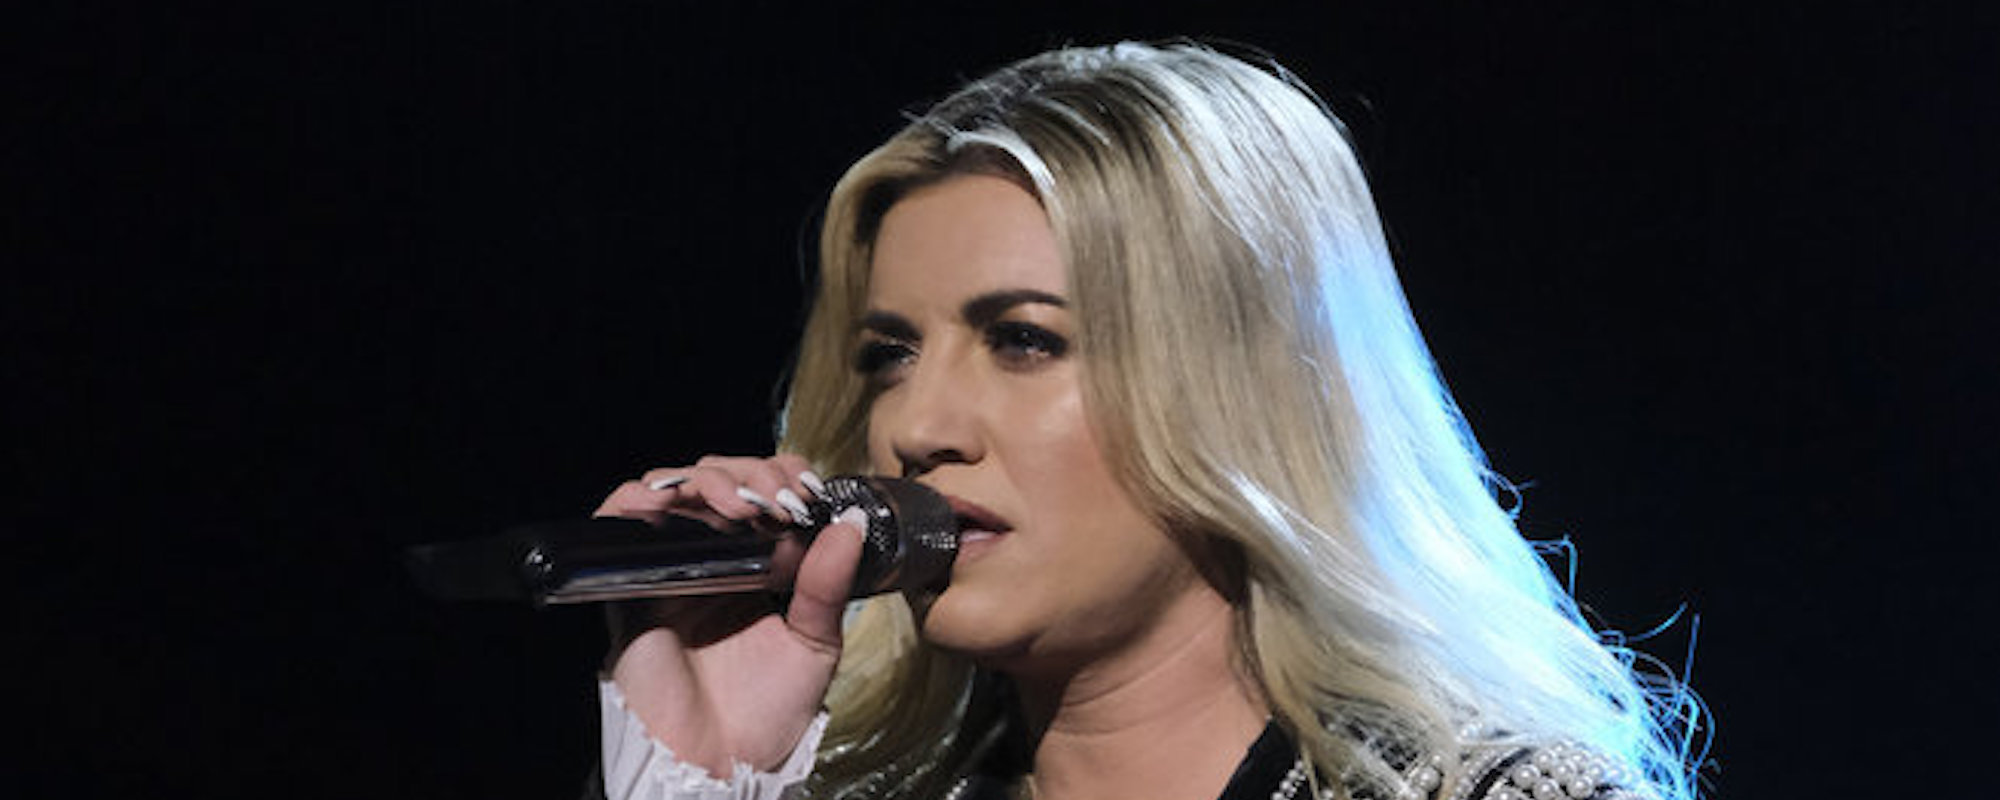 Country Singer Morgan Myles Fights for Top 10 Spot on ‘The Voice’ with Beyoncé’s “If I Were a Boy”